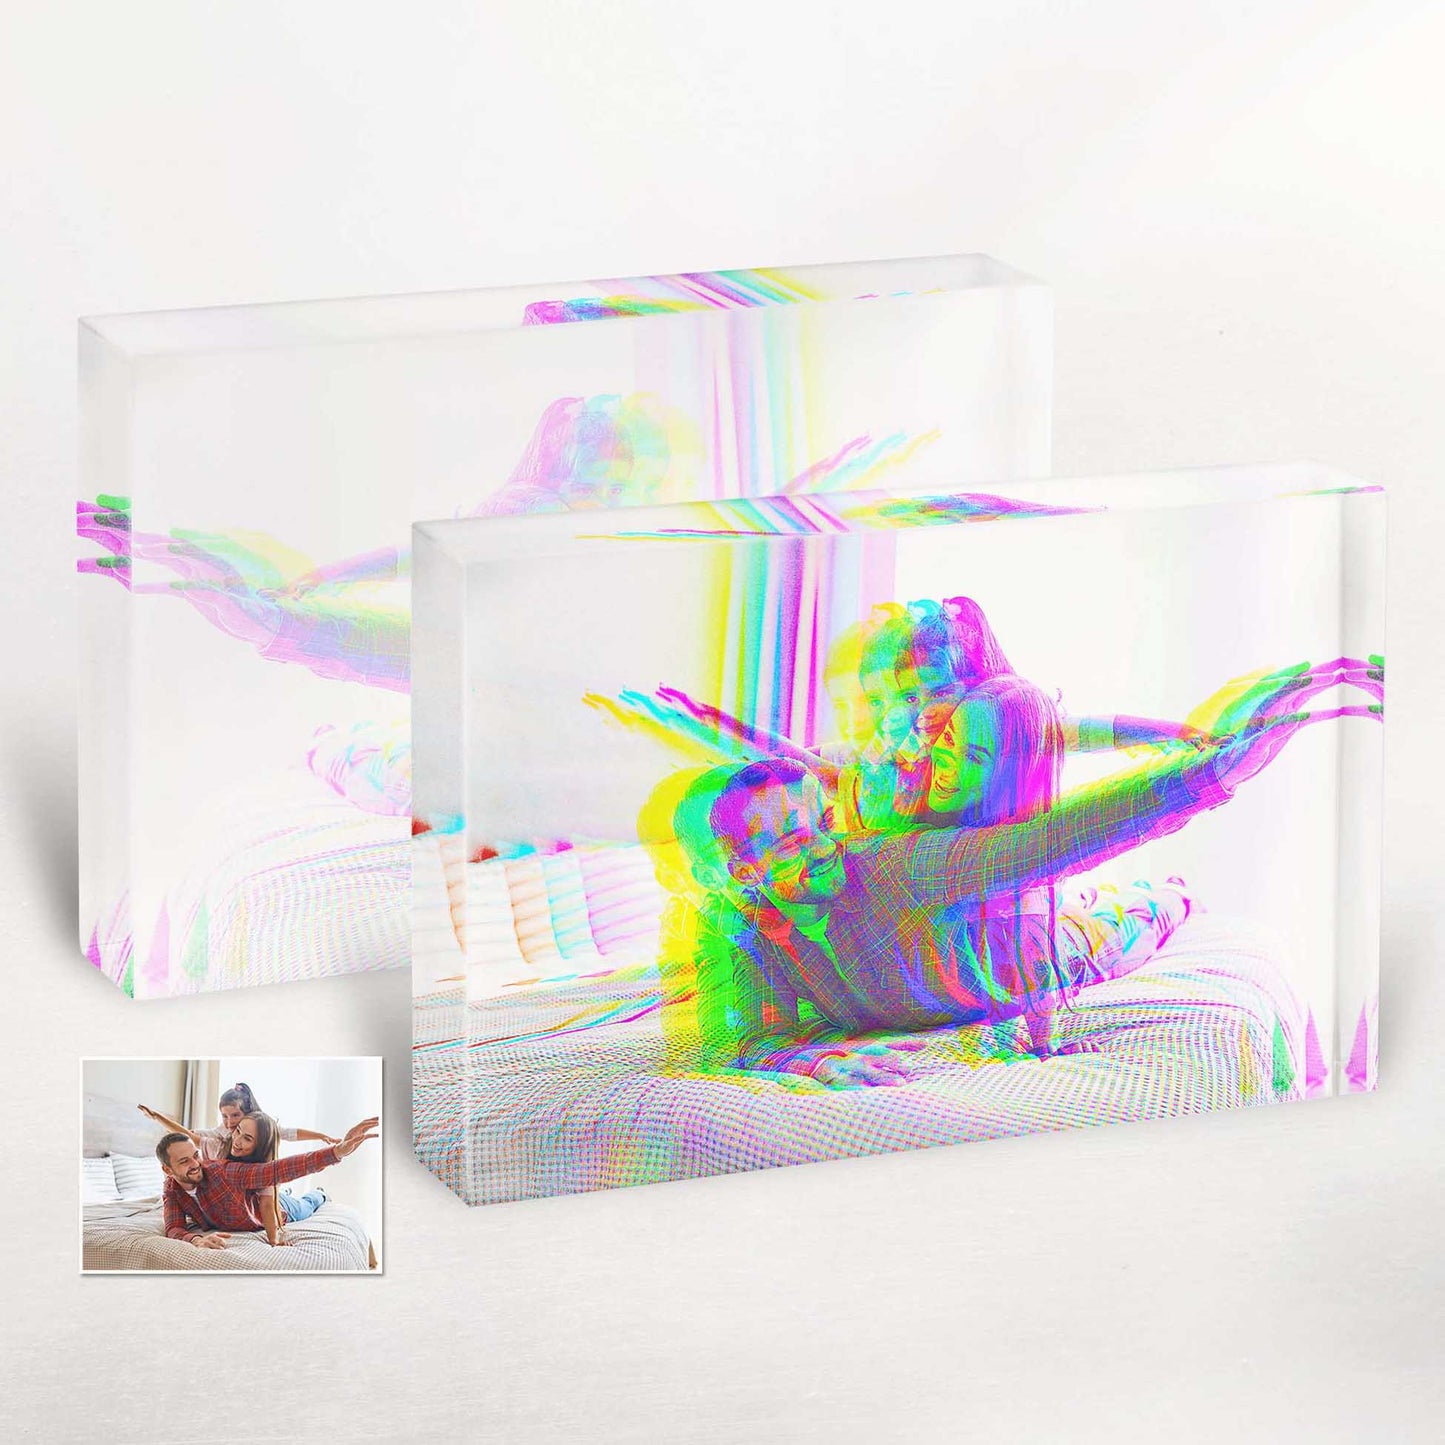 Elevate your home decor with our Personalized Anaglyph 3D Effect Acrylic Block Photo. This innovative piece combines the nostalgia of traditional anaglyph 3D with a modern acrylic block design, resulting in a captivating visual masterpiece